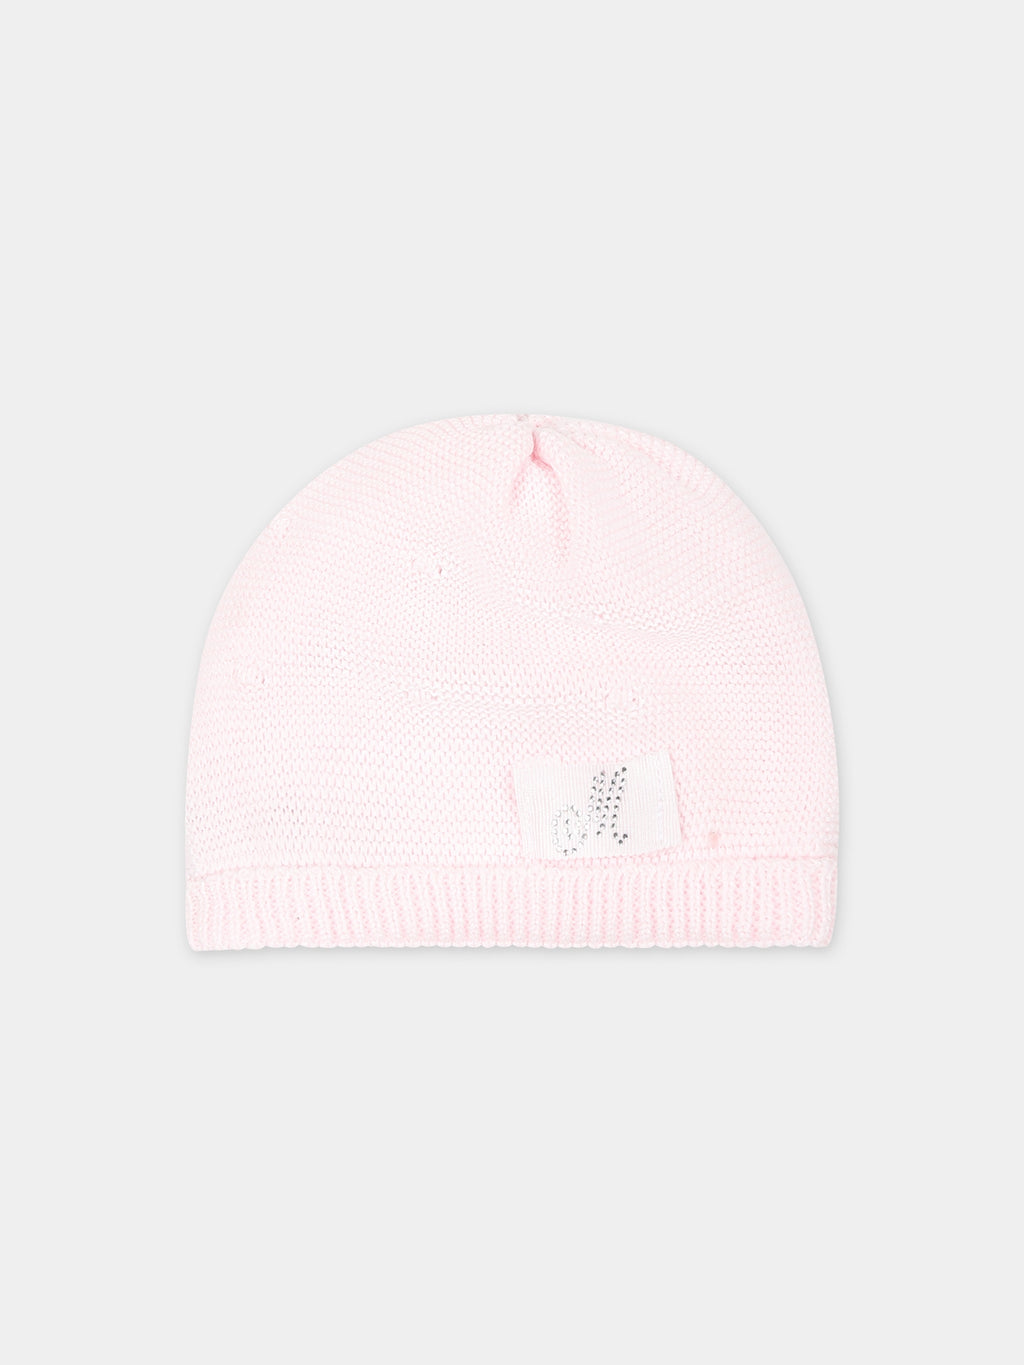 Pink hat for baby girl with logo